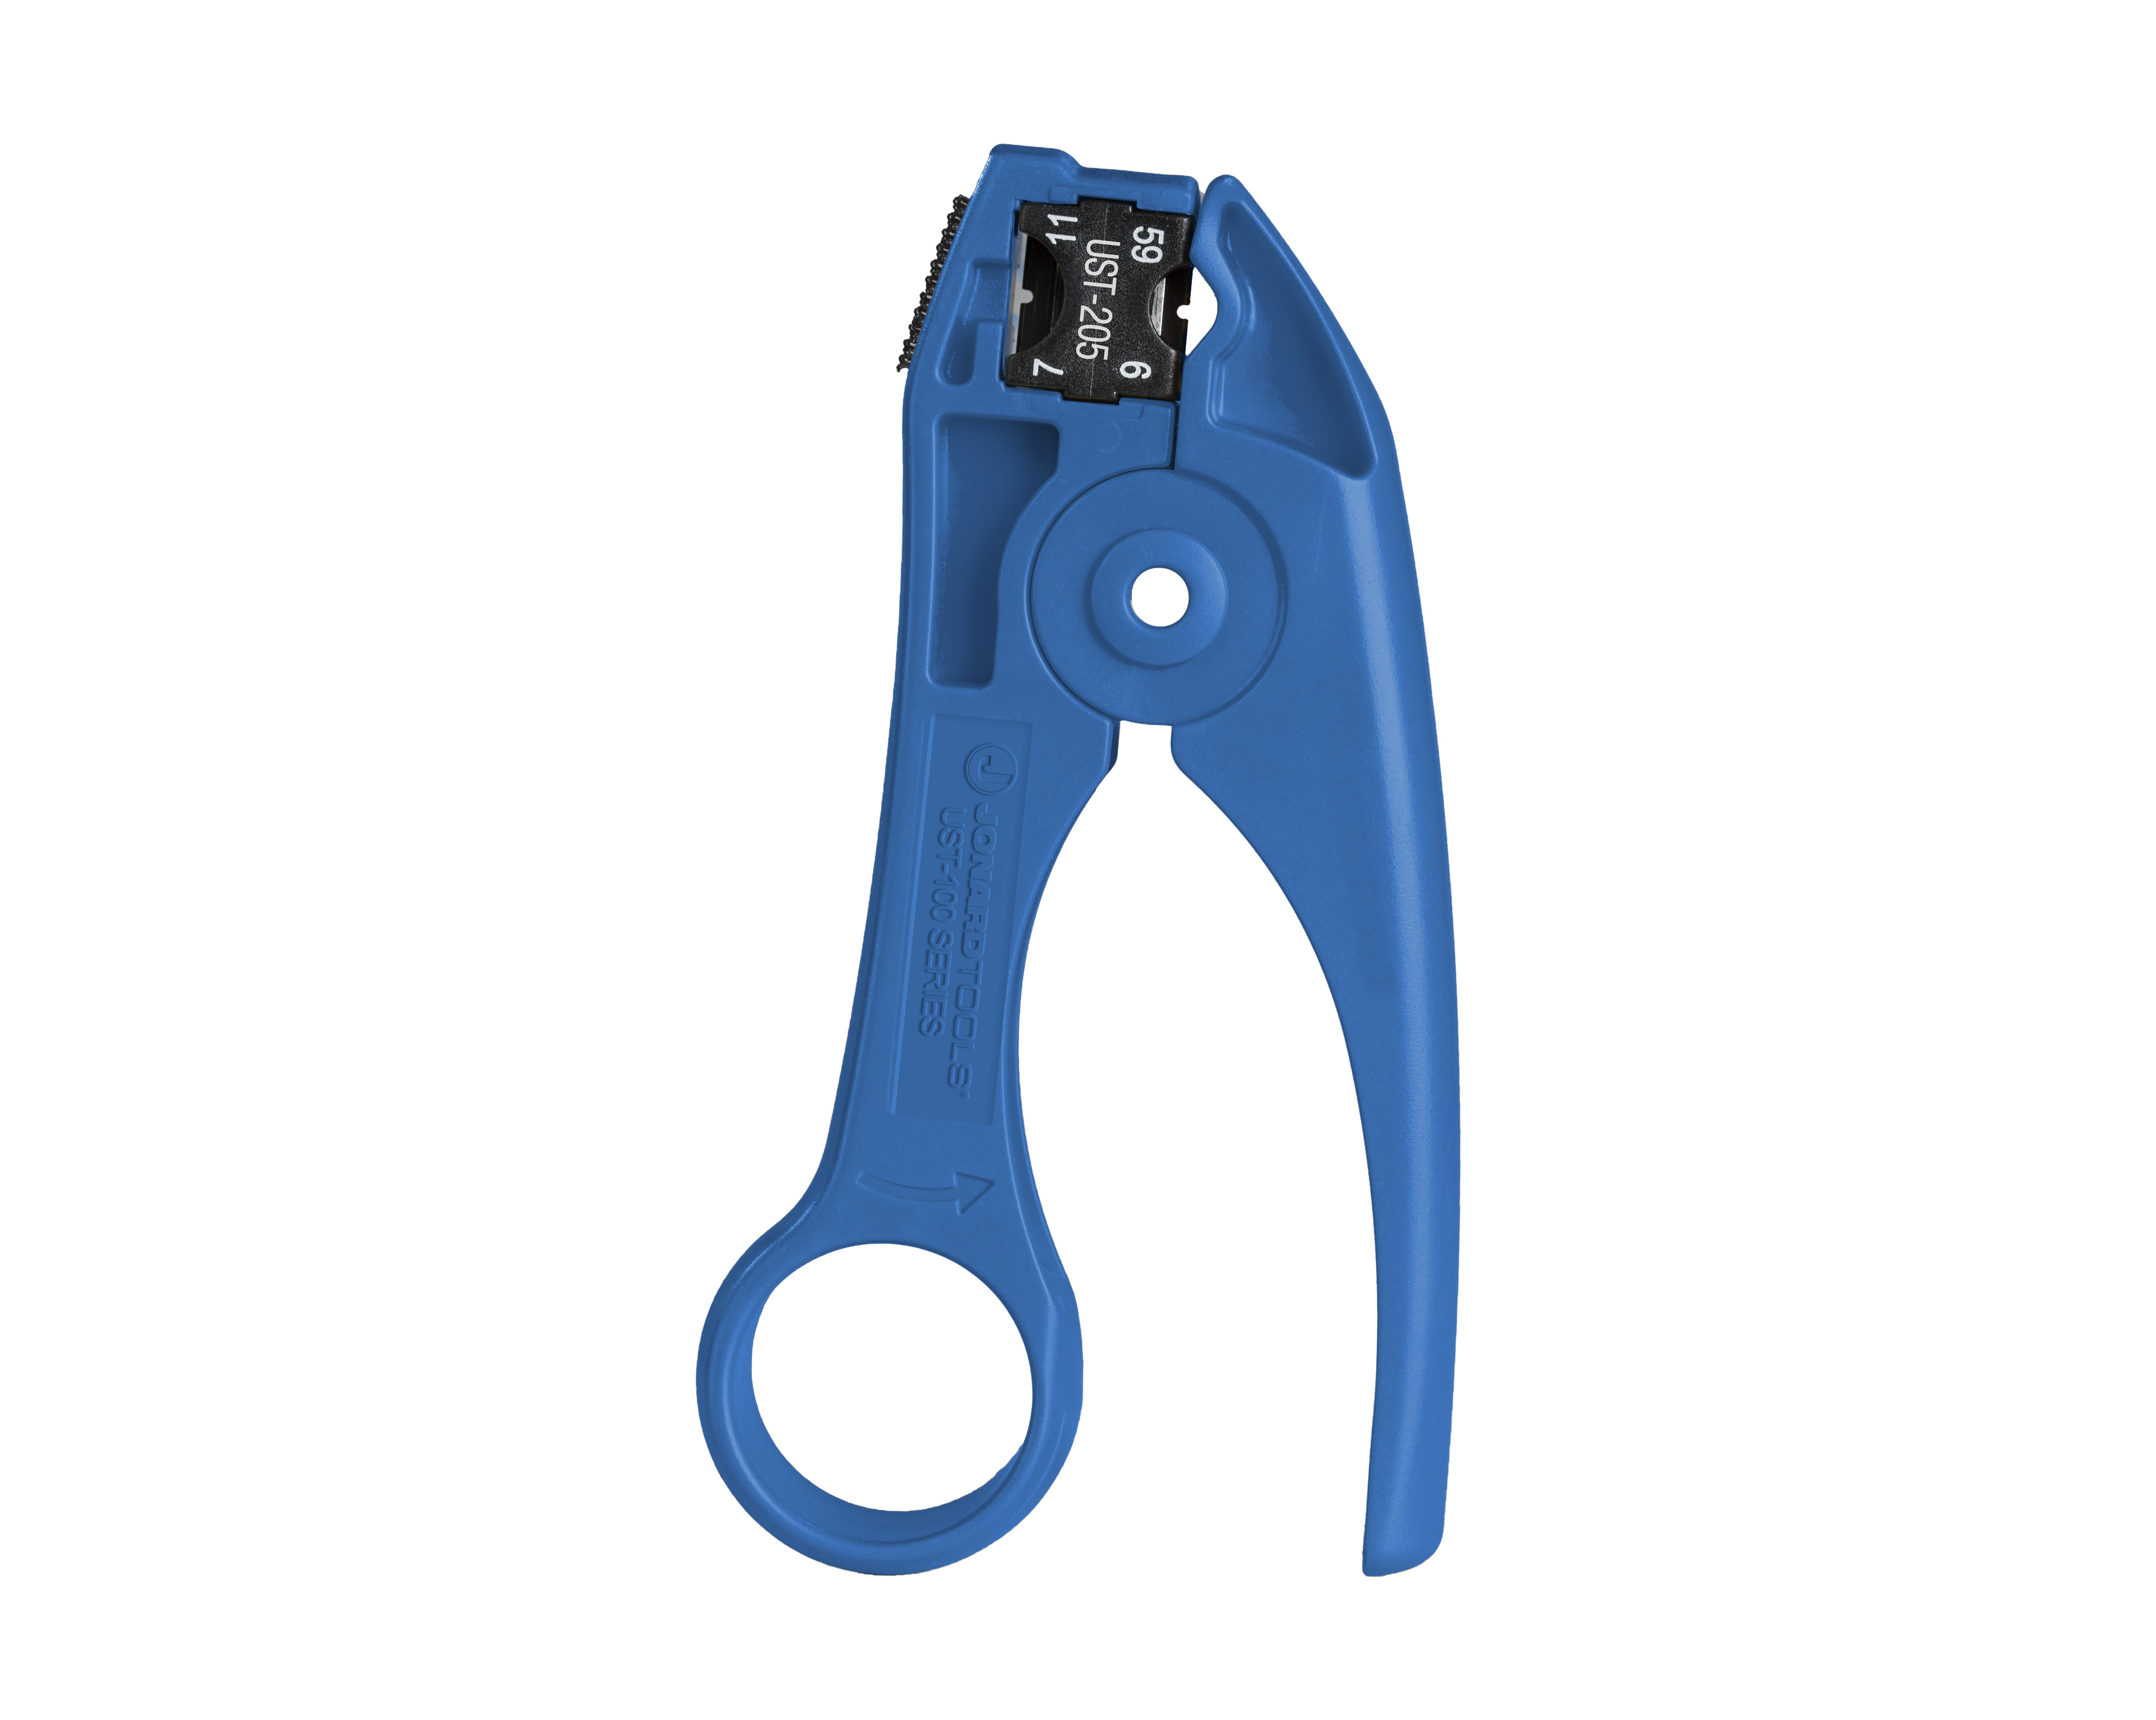 RG7 UTP STP : Round & Flat Cable : Premium Pro Grade : Coaxial Cable and Network Cable Stripper Urban Security Group Blue Cable Stripper For RG59 RG11 : Cat5e RG6 Cat6 